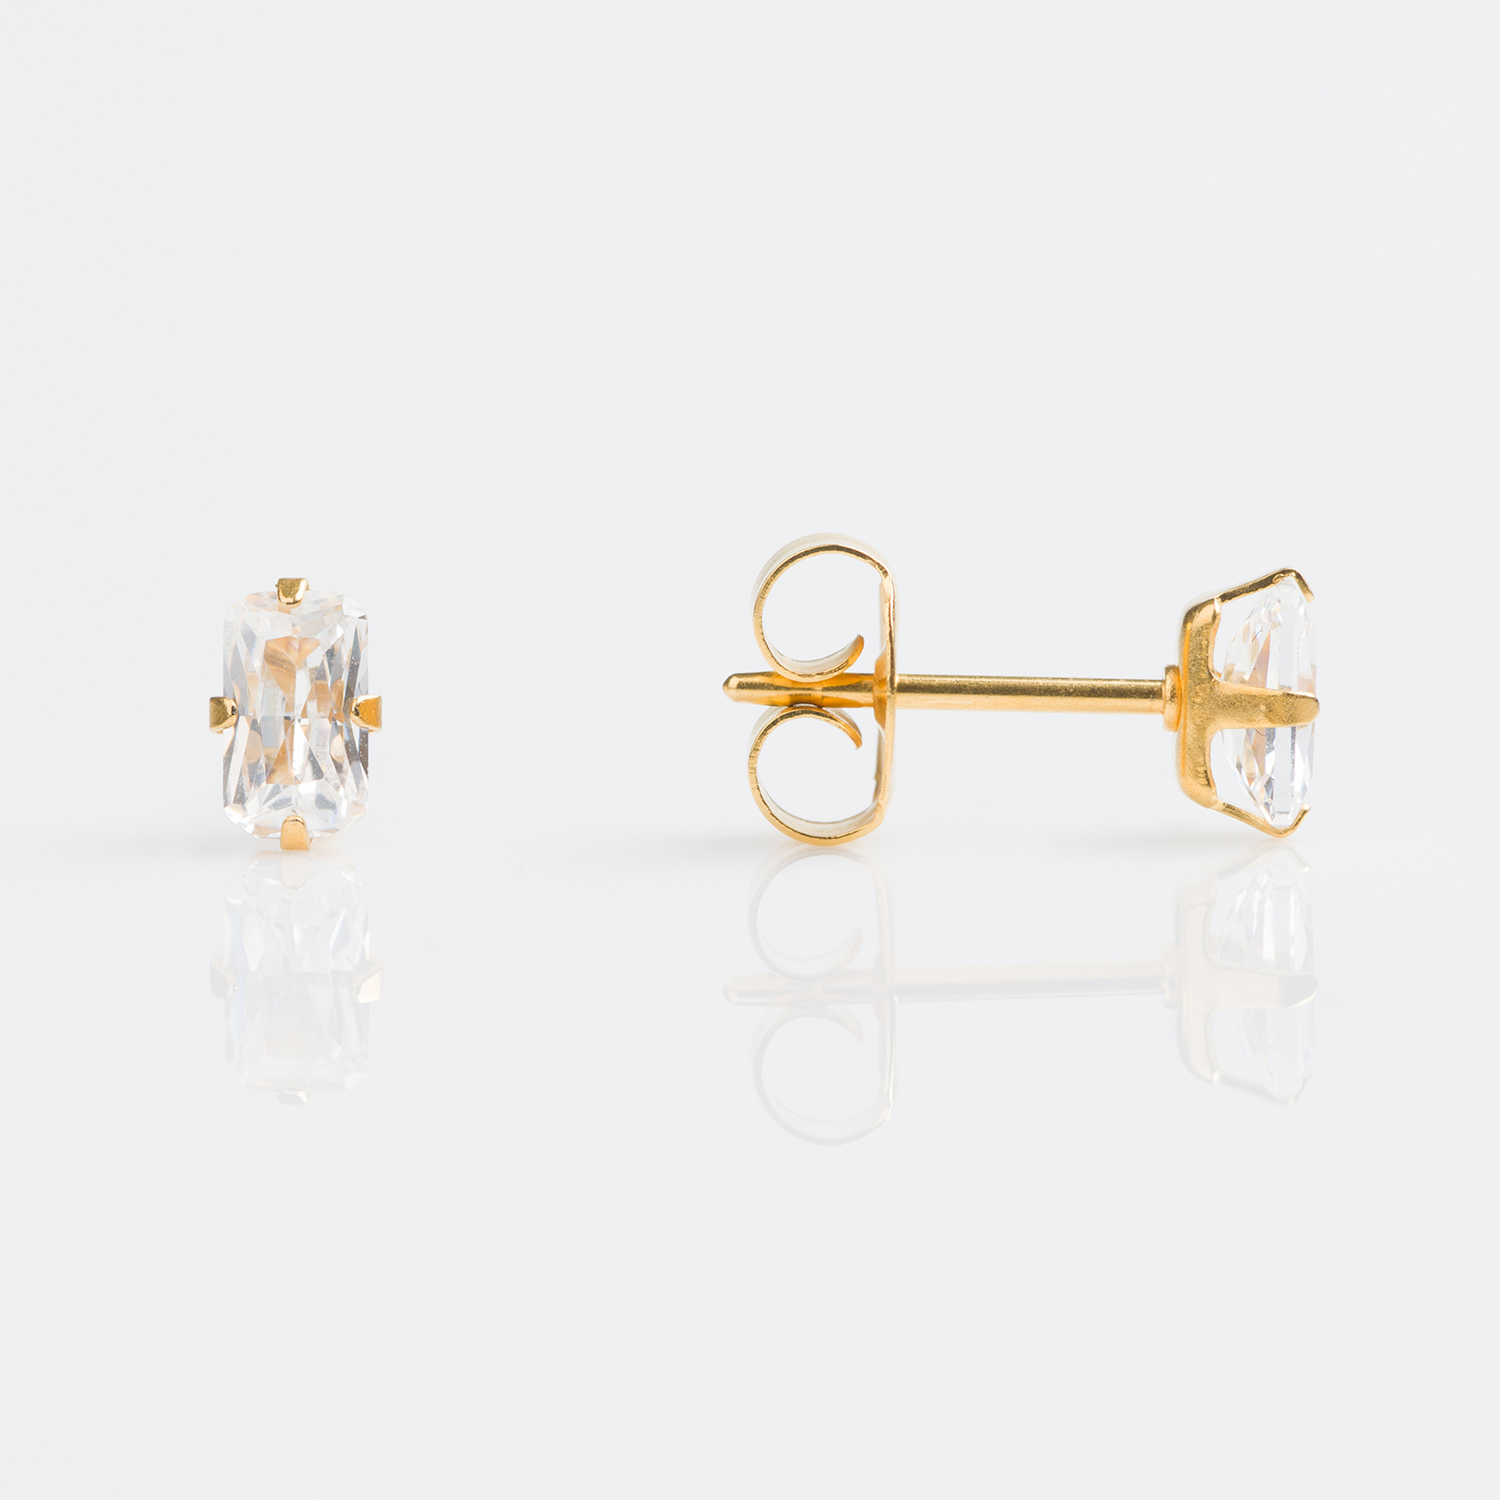 Studex Gold Plated 5X3mm Cubic Zirconia Earrings